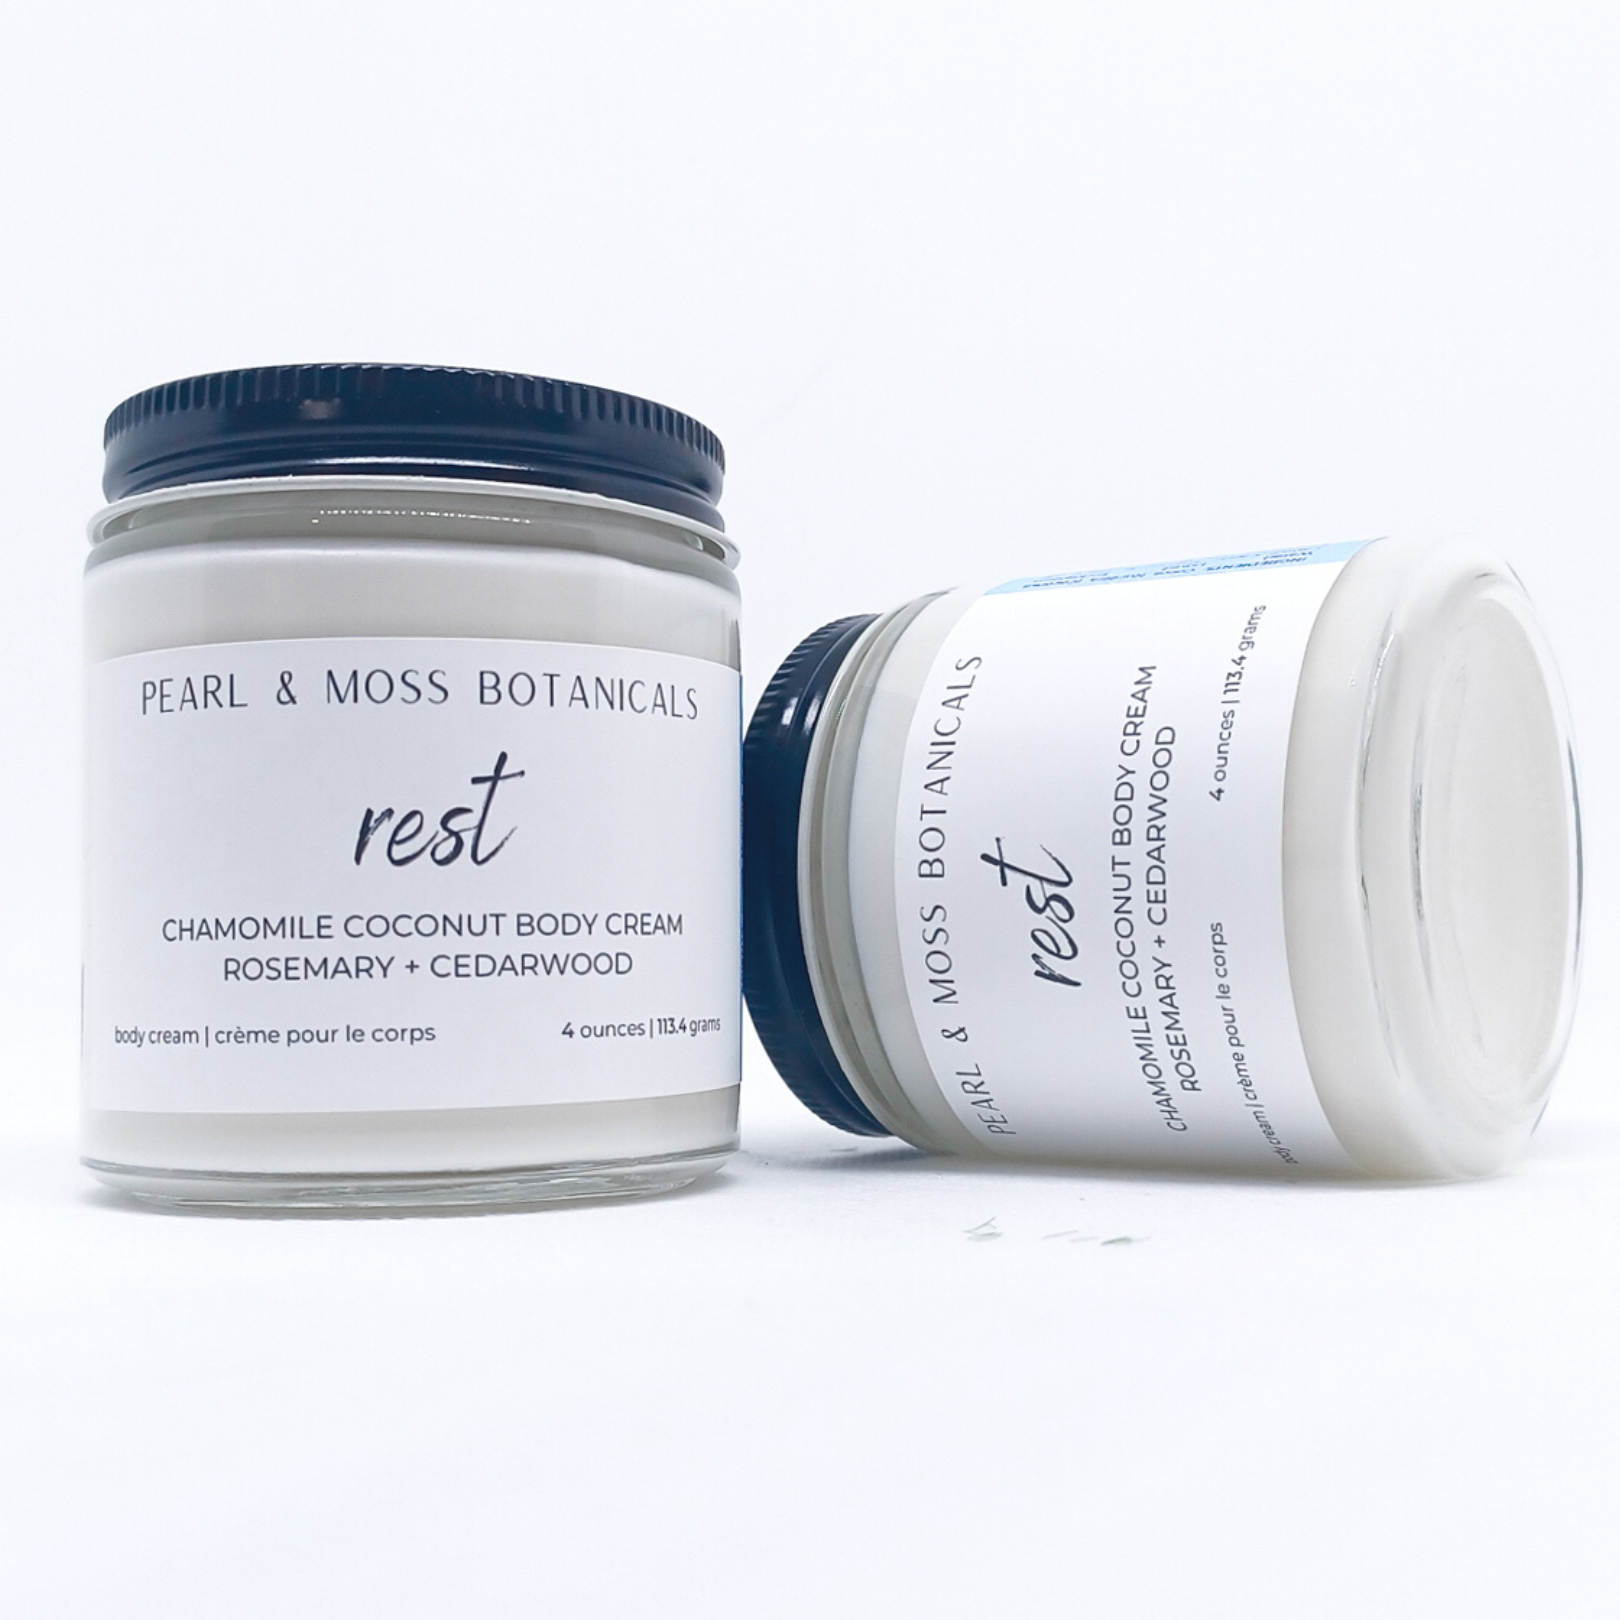 REST: REST is grounding and soothing, combination cedarwood and rosemary essential oils.  Light and smooth, the Chamomile Coconut Body Cream is softening and conditioning for the skin, with extra soothing effects from chamomile extract. Rich and luxurious, tucuma and babassu butter shine in this body cream, bringing a velvety smooth finish to your skin, while providing delicious hydration to your skin, courtesy of coconut water.